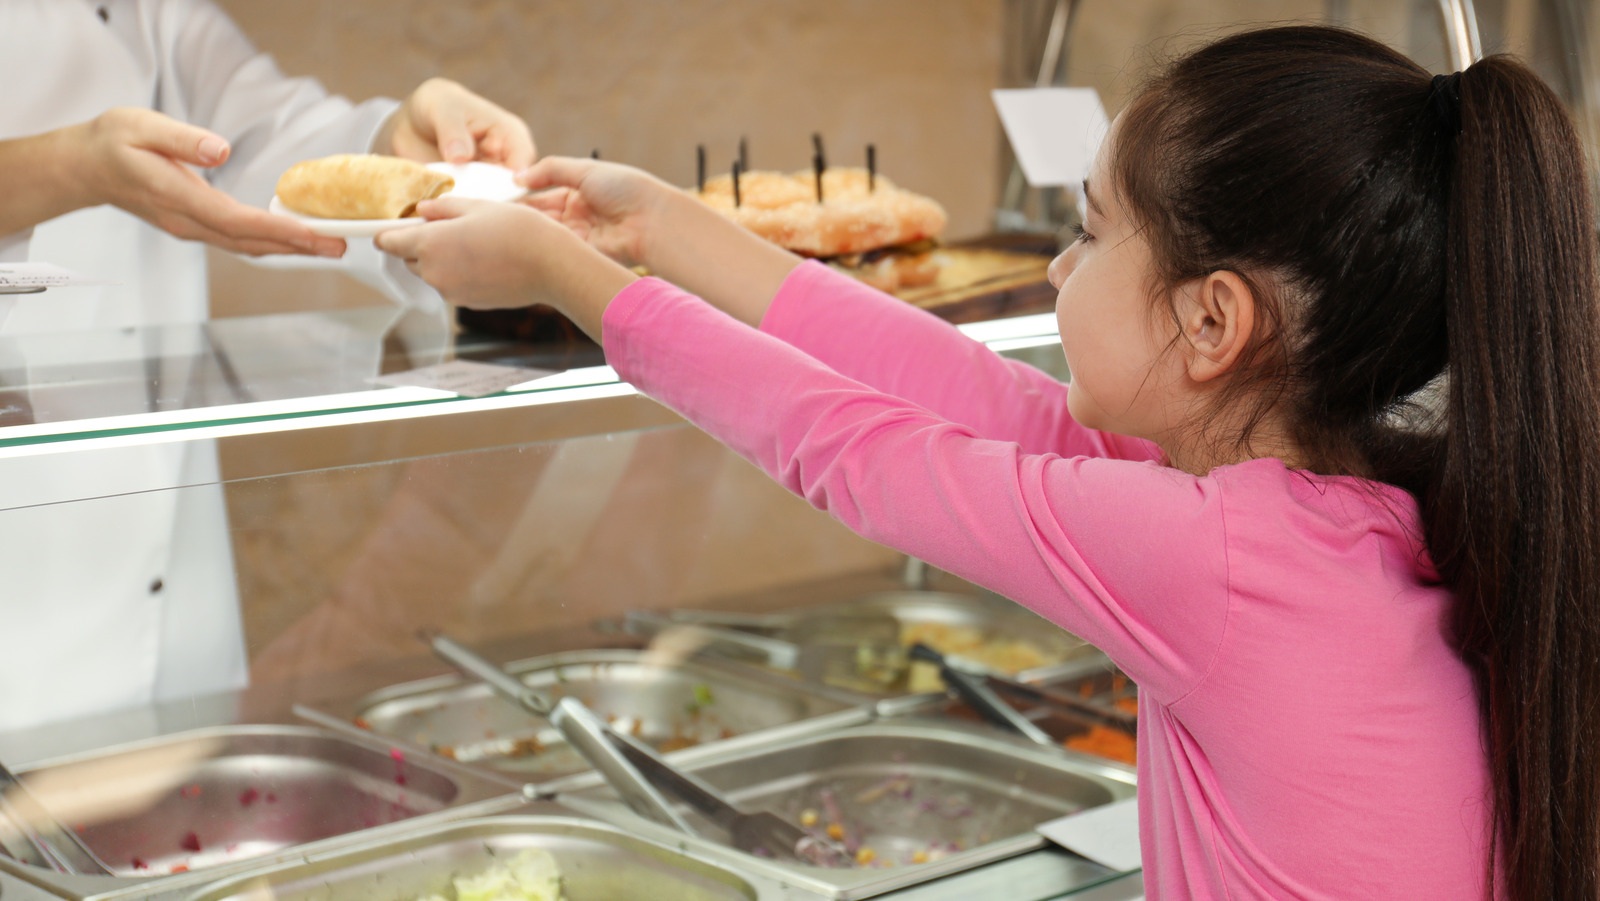 The Kid's Meal: 6 Reasons to Stop Feeding Your Kids “Kid Food” Now!, Nutrition